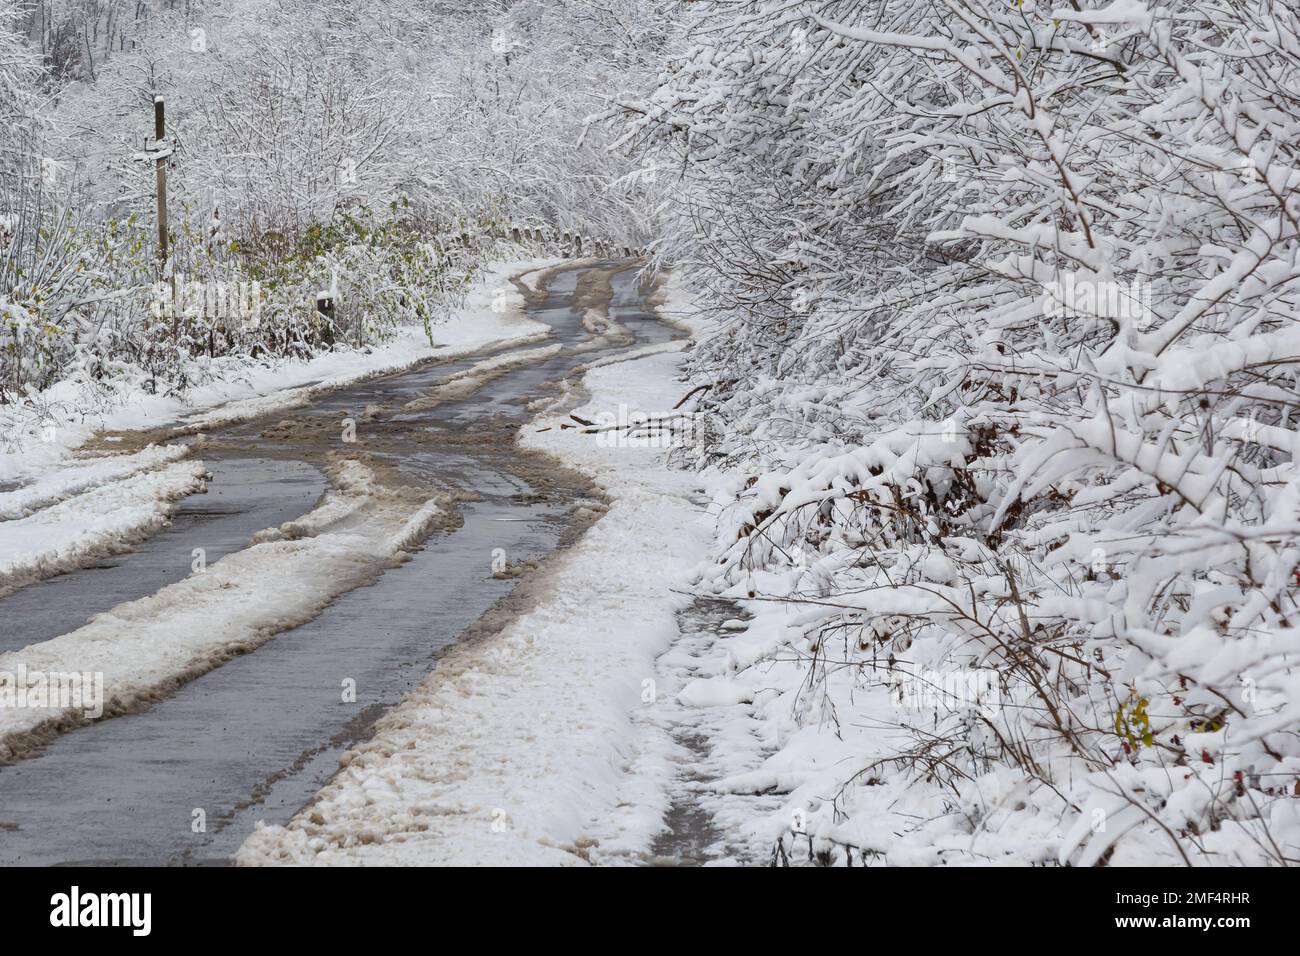 A country road through the forest, a wet road with snow falling from the trees. Stock Photo